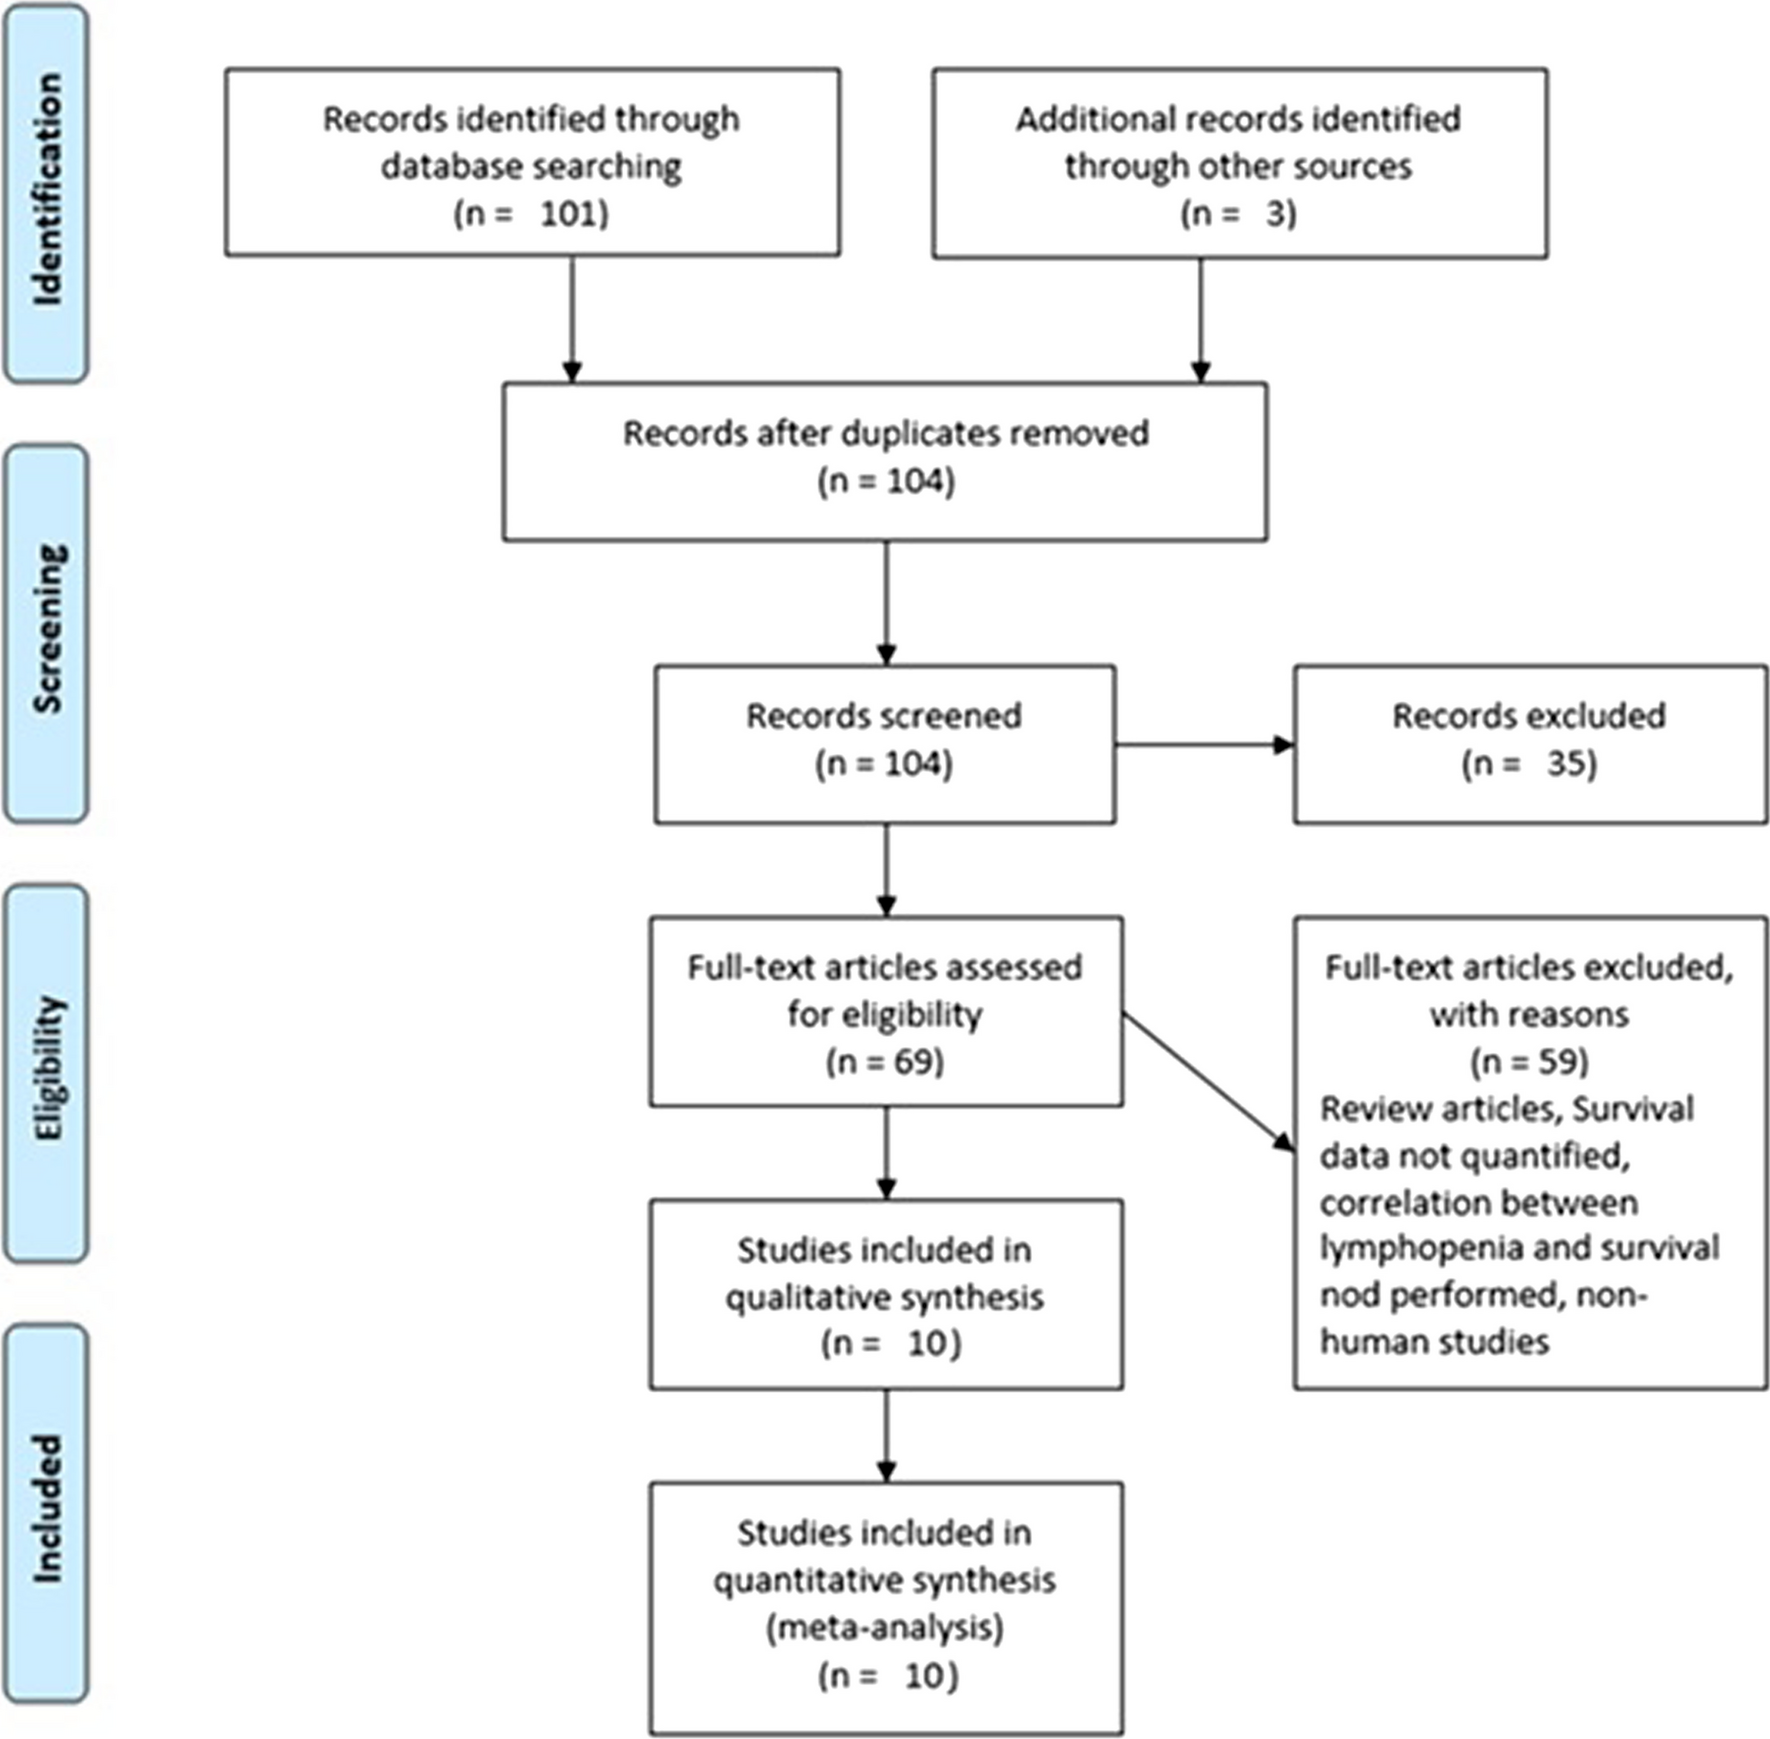 Systematic review and pooled analysis of the impact of treatment-induced lymphopenia on survival of glioblastoma patients